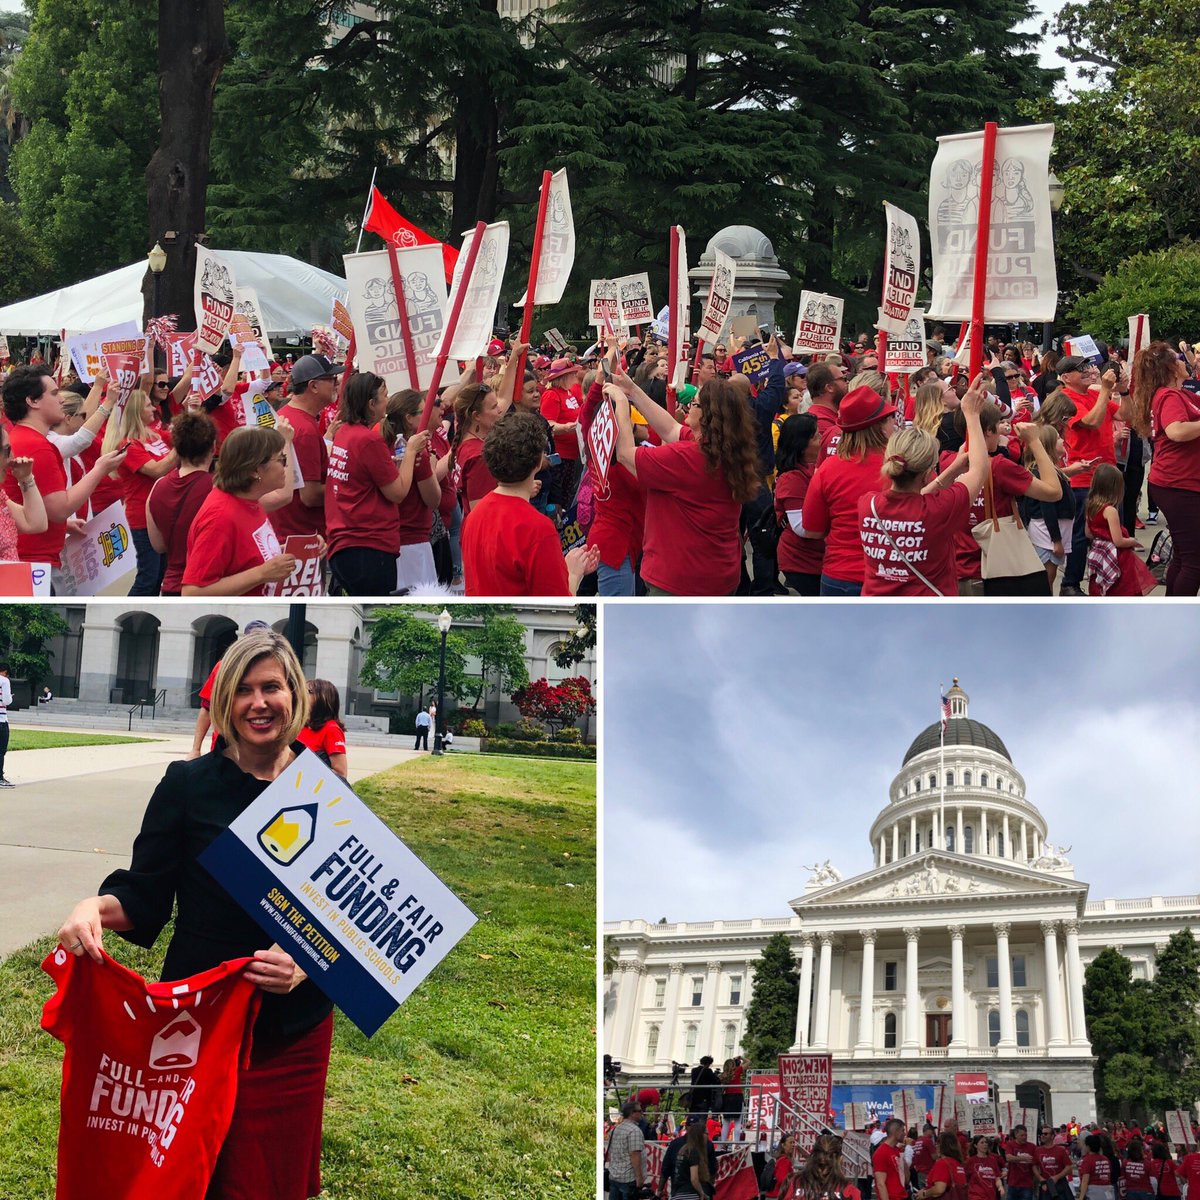 Public educators united.  Hear us loudly and proudly support #fullandfairfunding at the capital today.